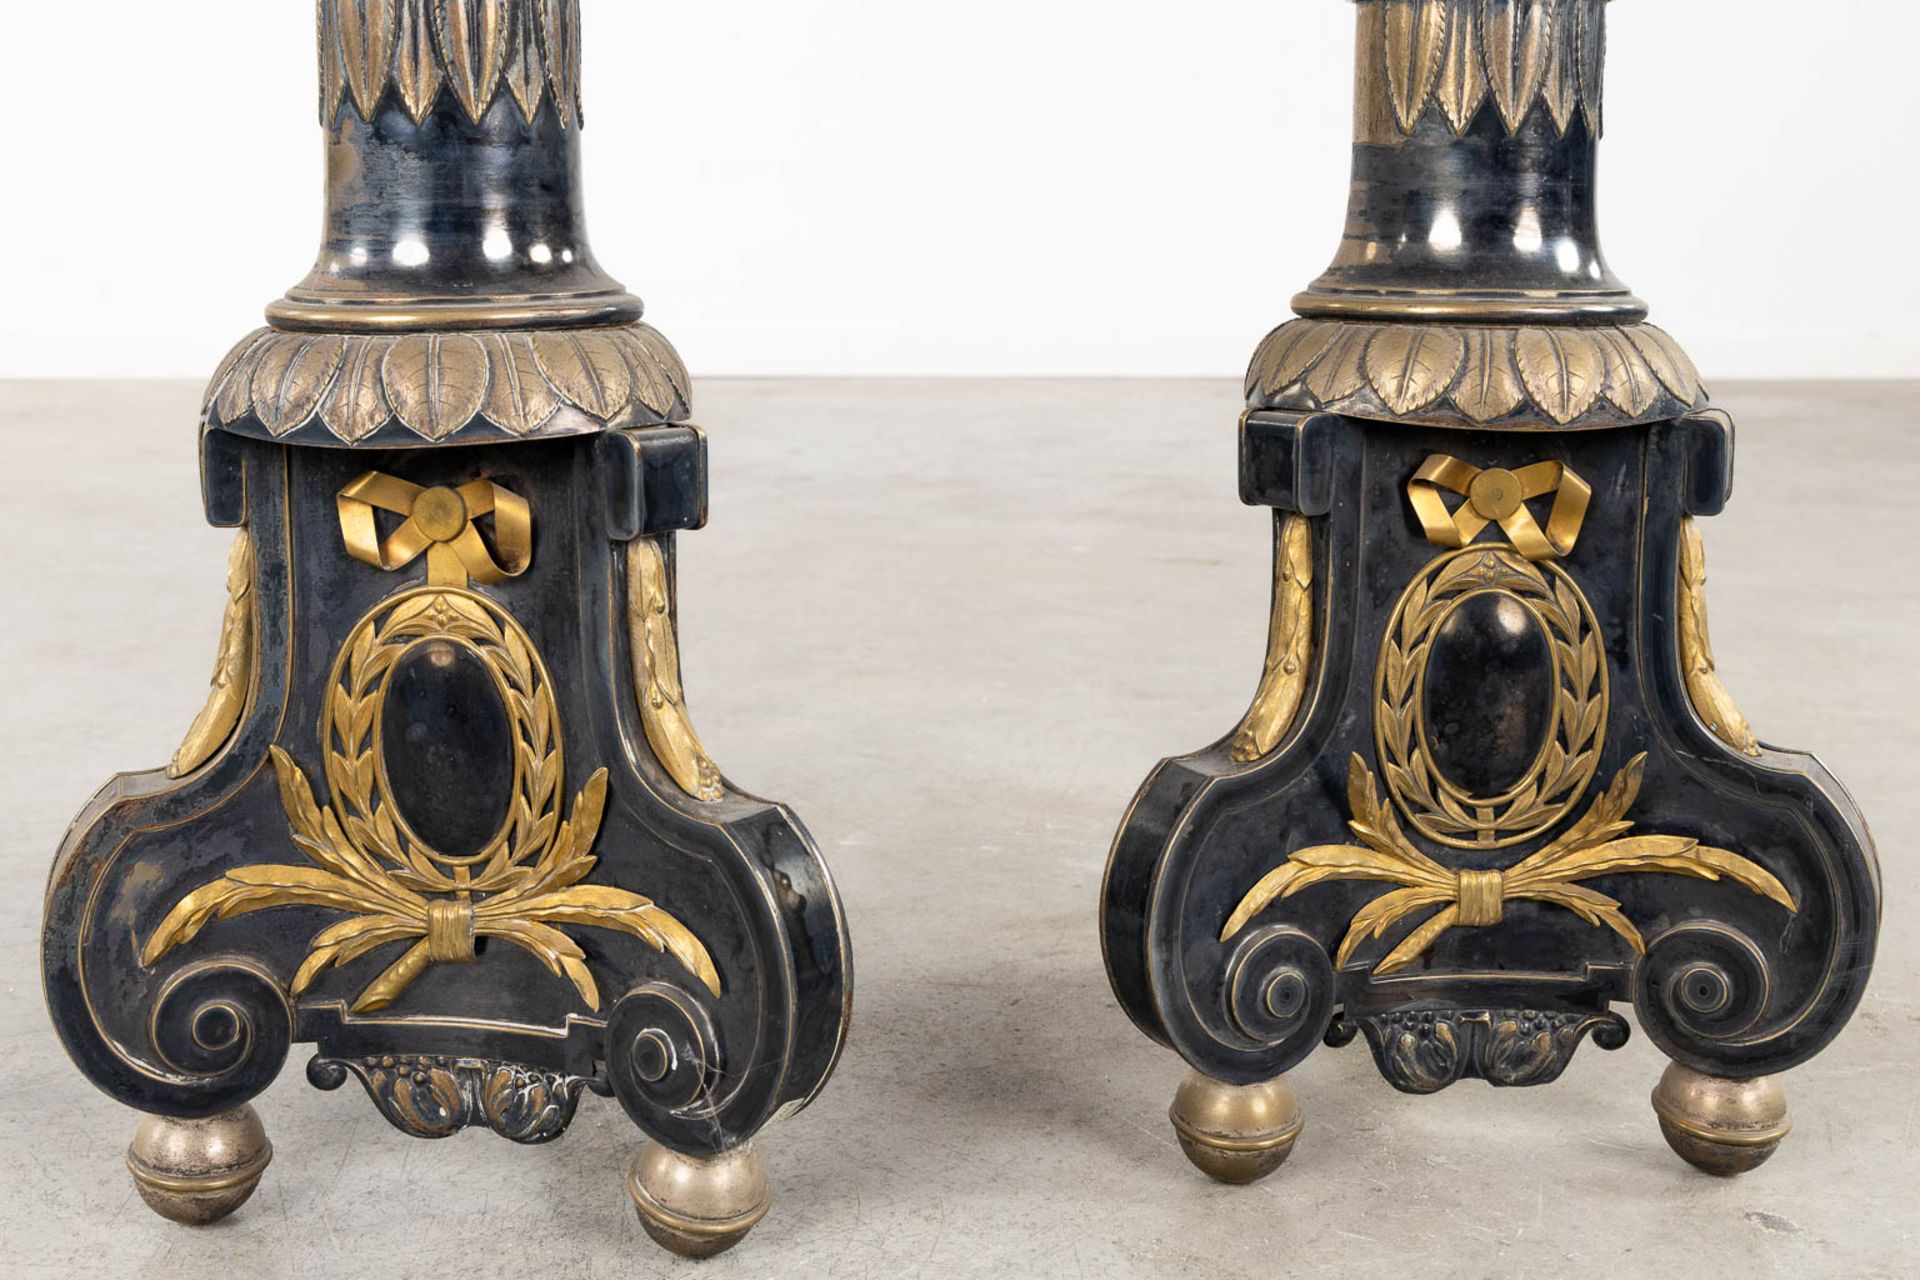 A pair of Church Candlesticks, silver- and gold-plated metal. 19th C. (H:120 cm) - Bild 8 aus 9